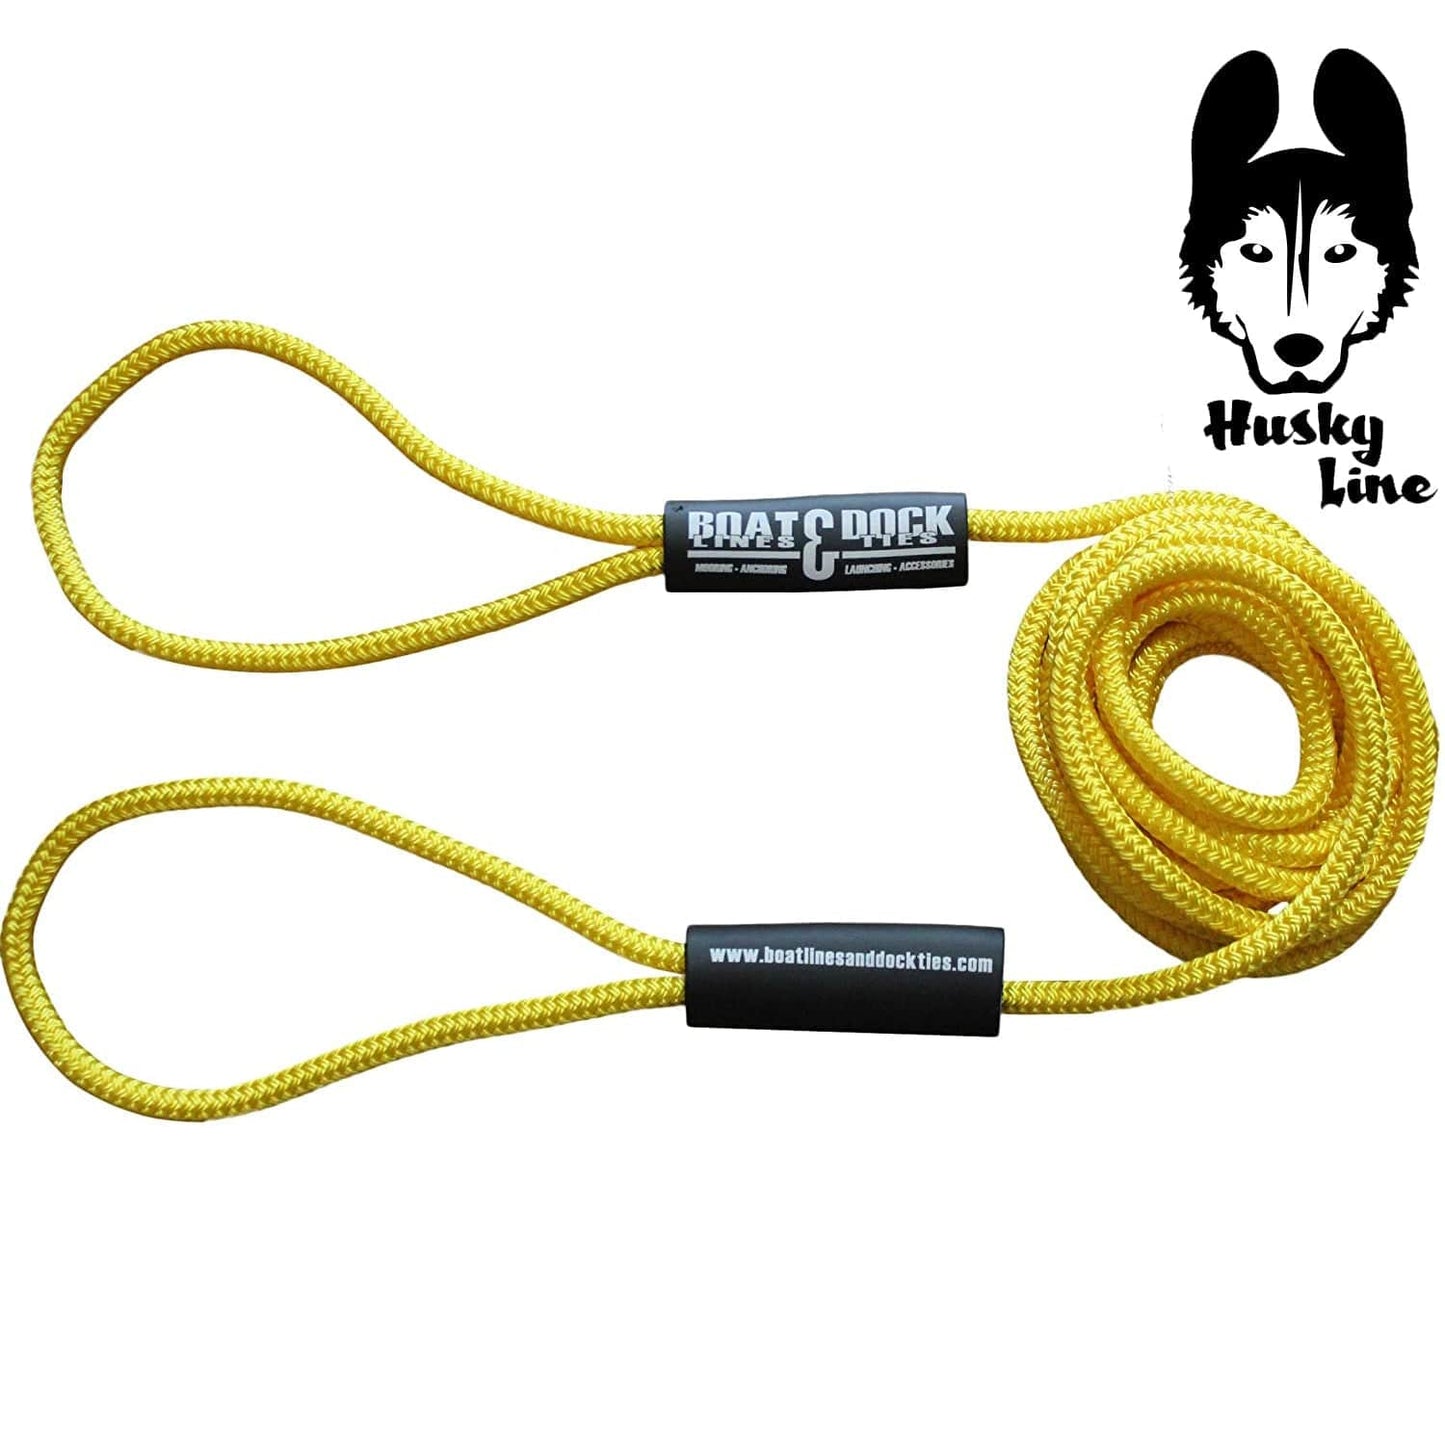 Boat Throw Rope- "Husky Line" 2 Loop Double Braided Nylon Rope, Stitched Loops and Floats - Boat Lines & Dock Ties Boat Lines & Dock Ties 25' / Yellow